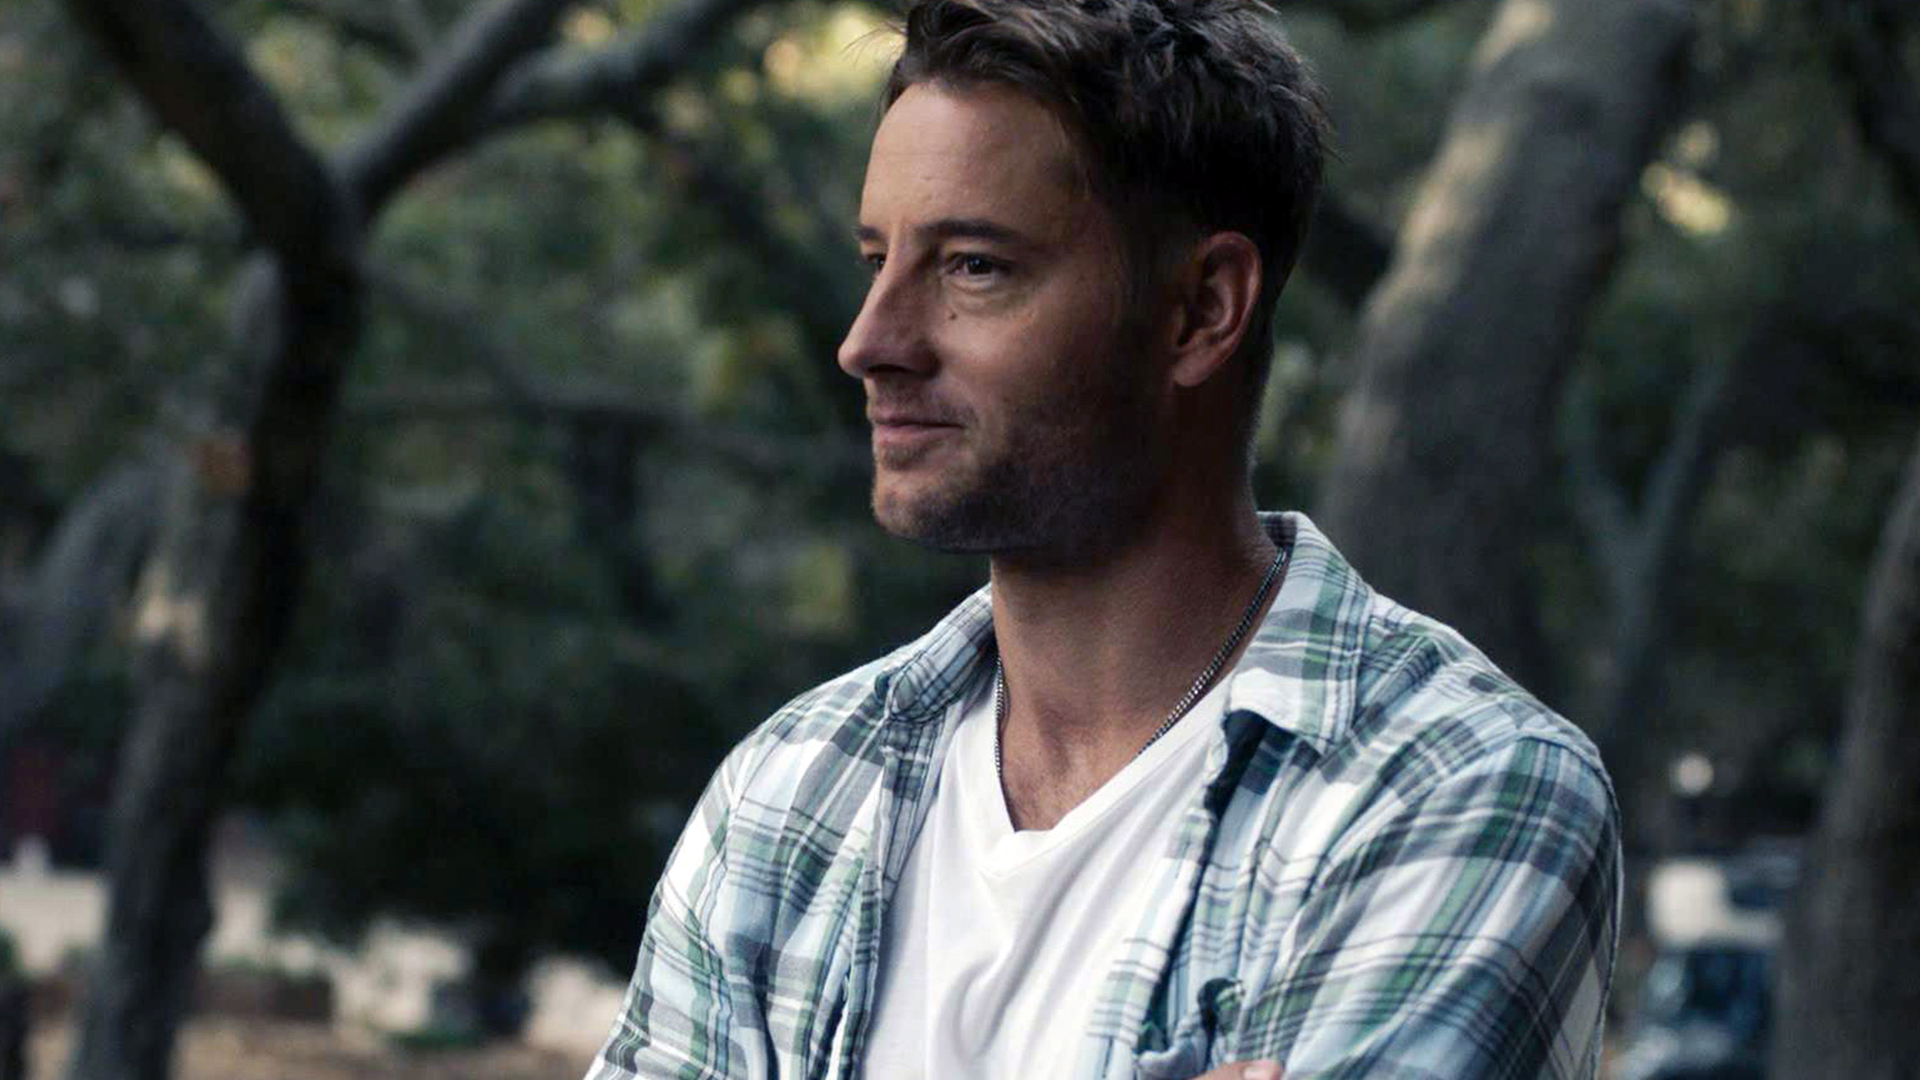 Justin Hartley as Kevin Pearson on the 'This Is Us' Season 5 premiere in 2020